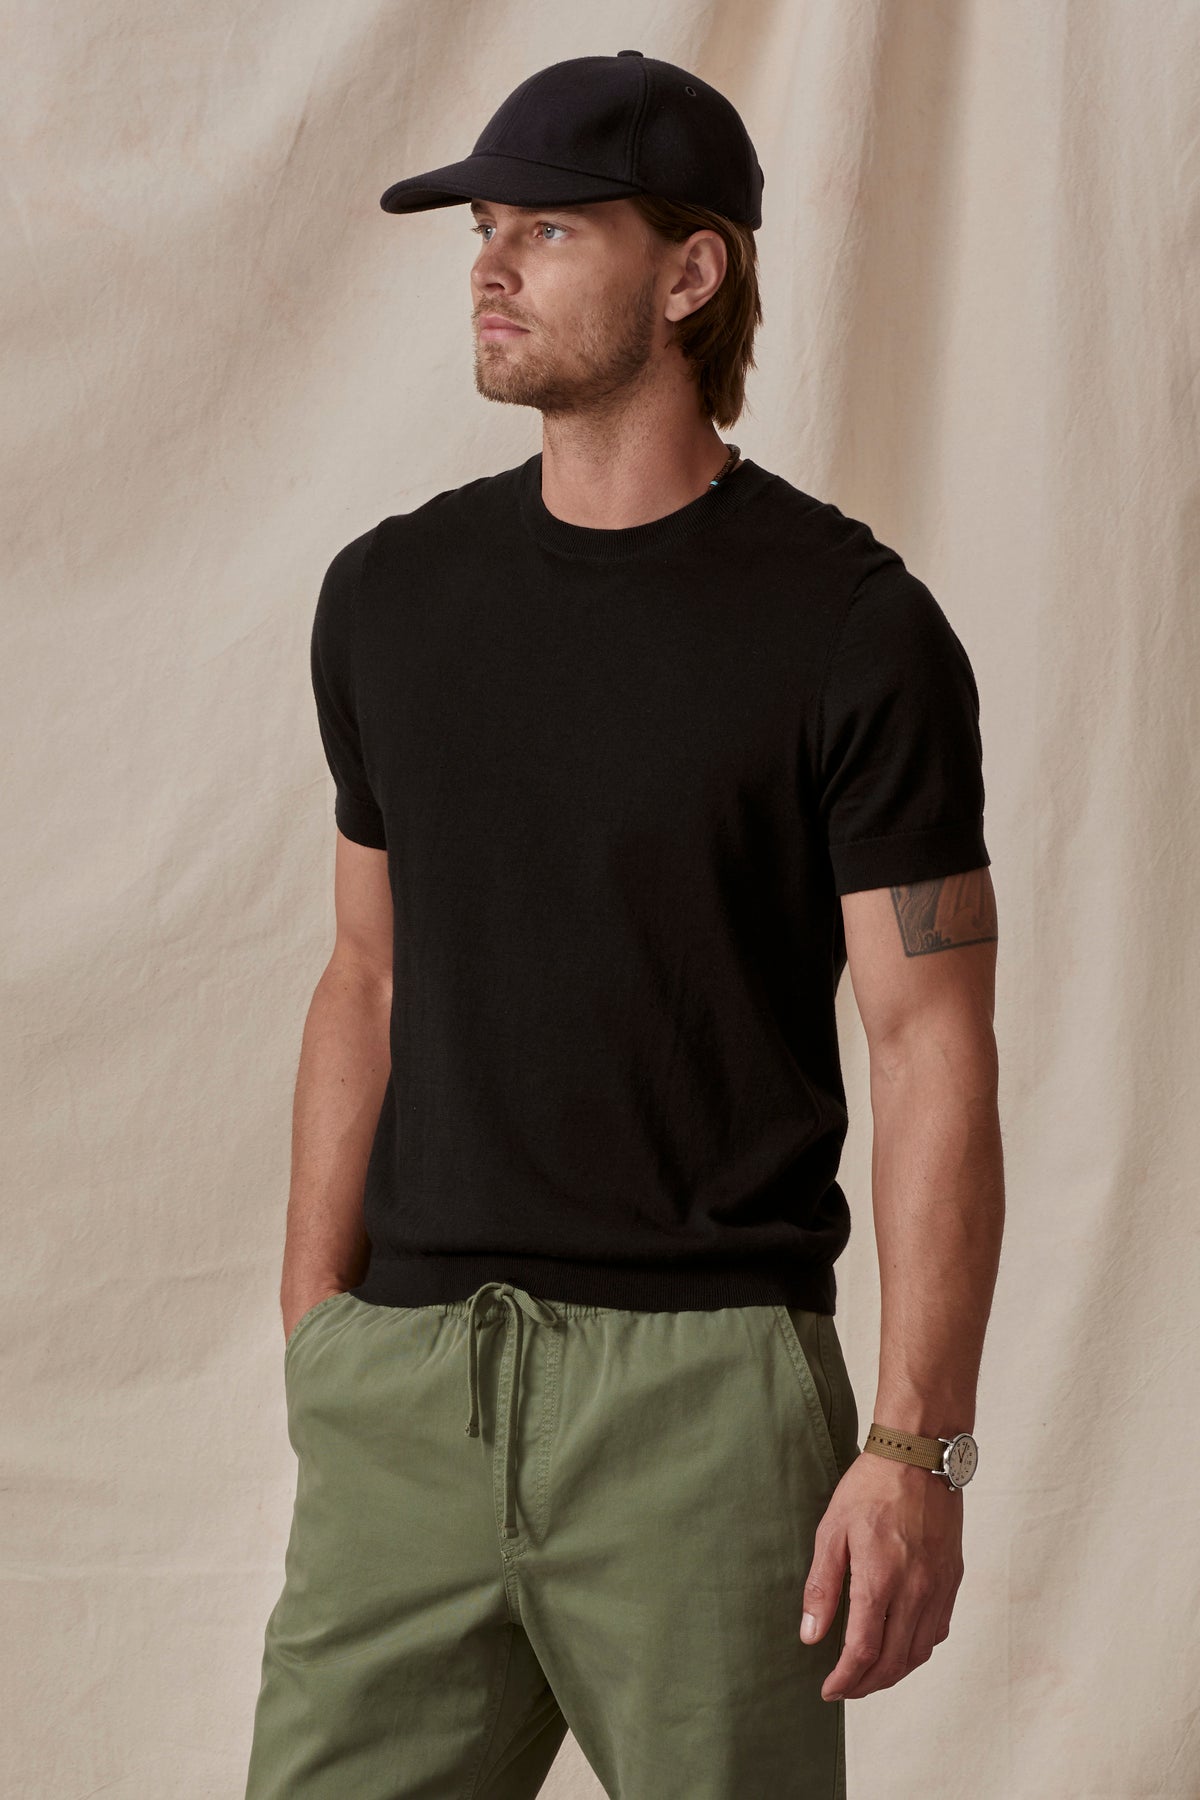 A man in a Velvet by Graham & Spencer cotton/linen blend black Dexter Crew t-shirt and green pants with a black cap, standing against a beige background, looking to the side.-36753529340097